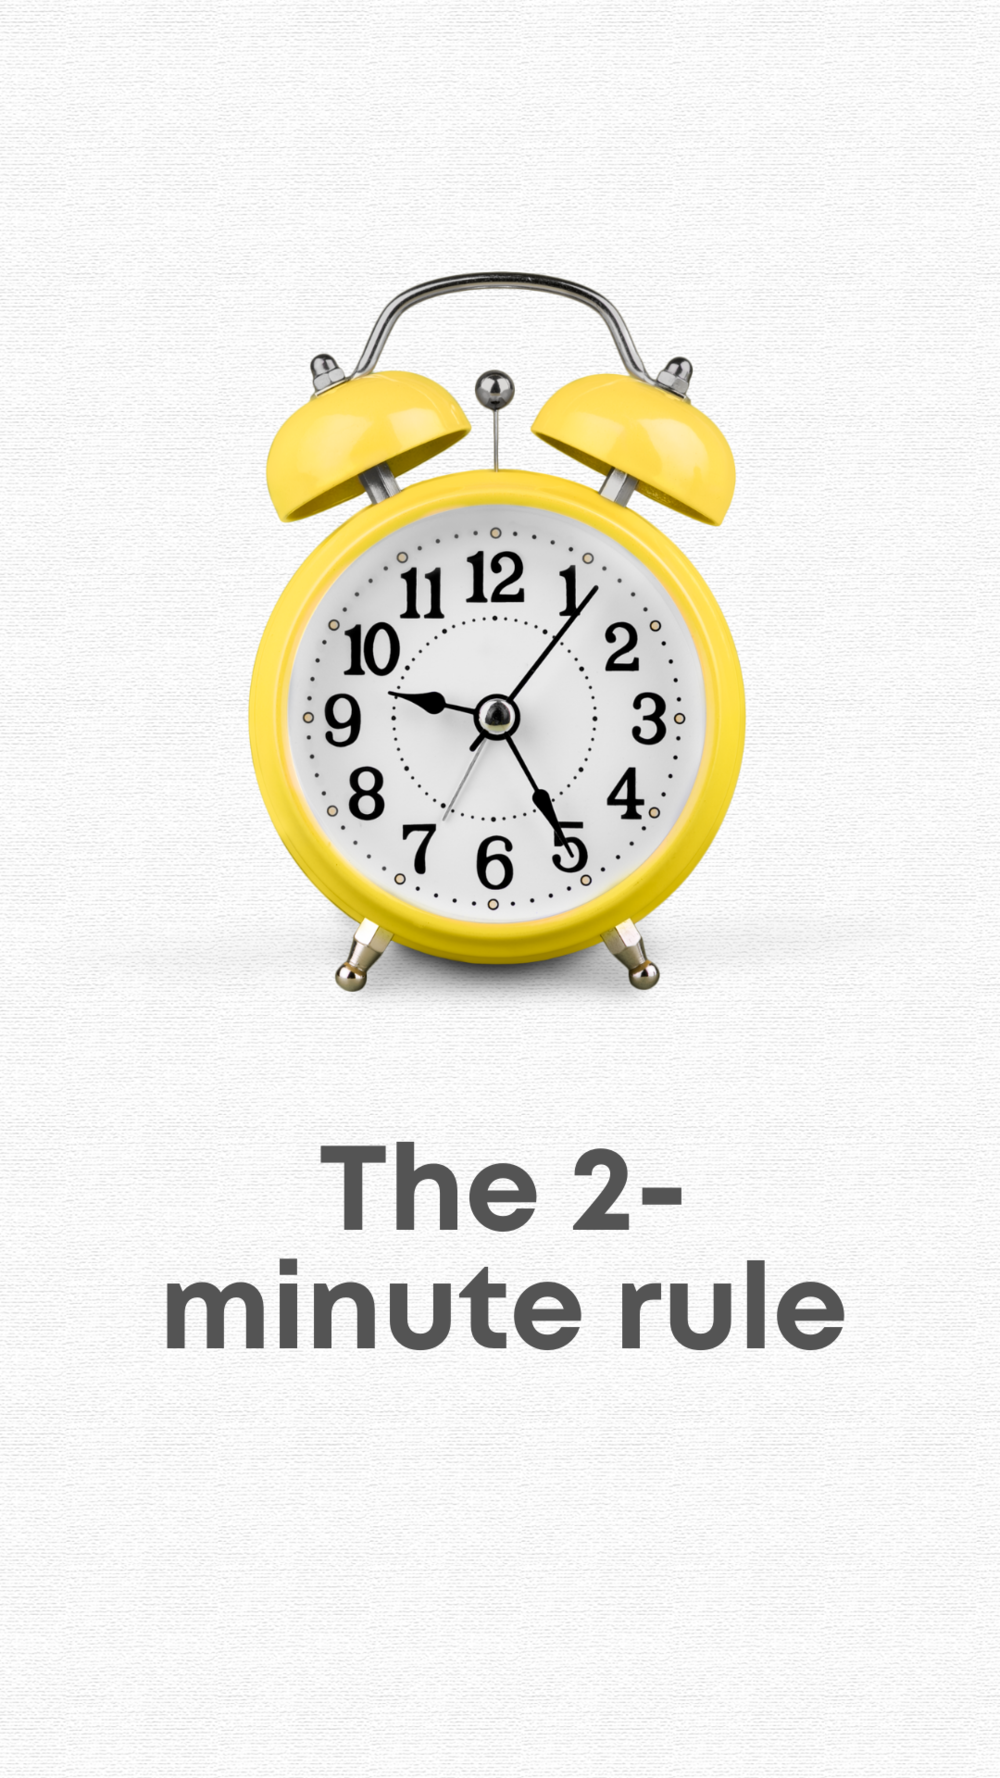 How the 2-minute rule has changed my life